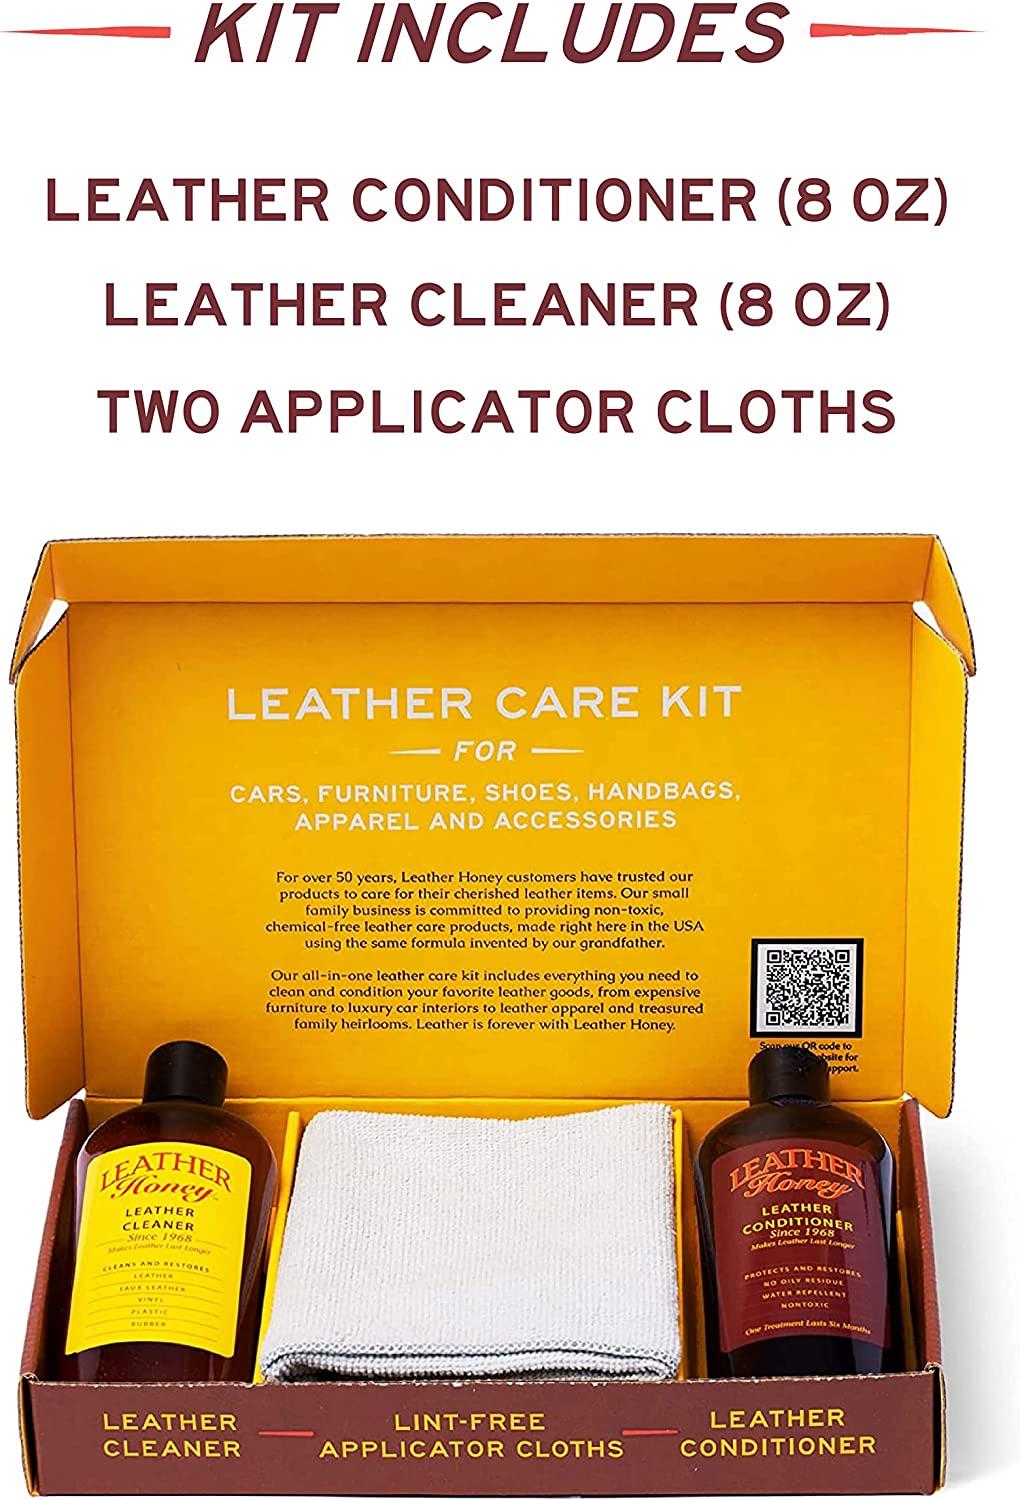 Leather Honey Complete Leather Care Kit Including Leather Conditioner (8  oz), Leather Cleaner (8 oz) and Two Applicator Cloths for use on Leather  Apparel, Furniture, Auto Interiors, Shoes, Bags